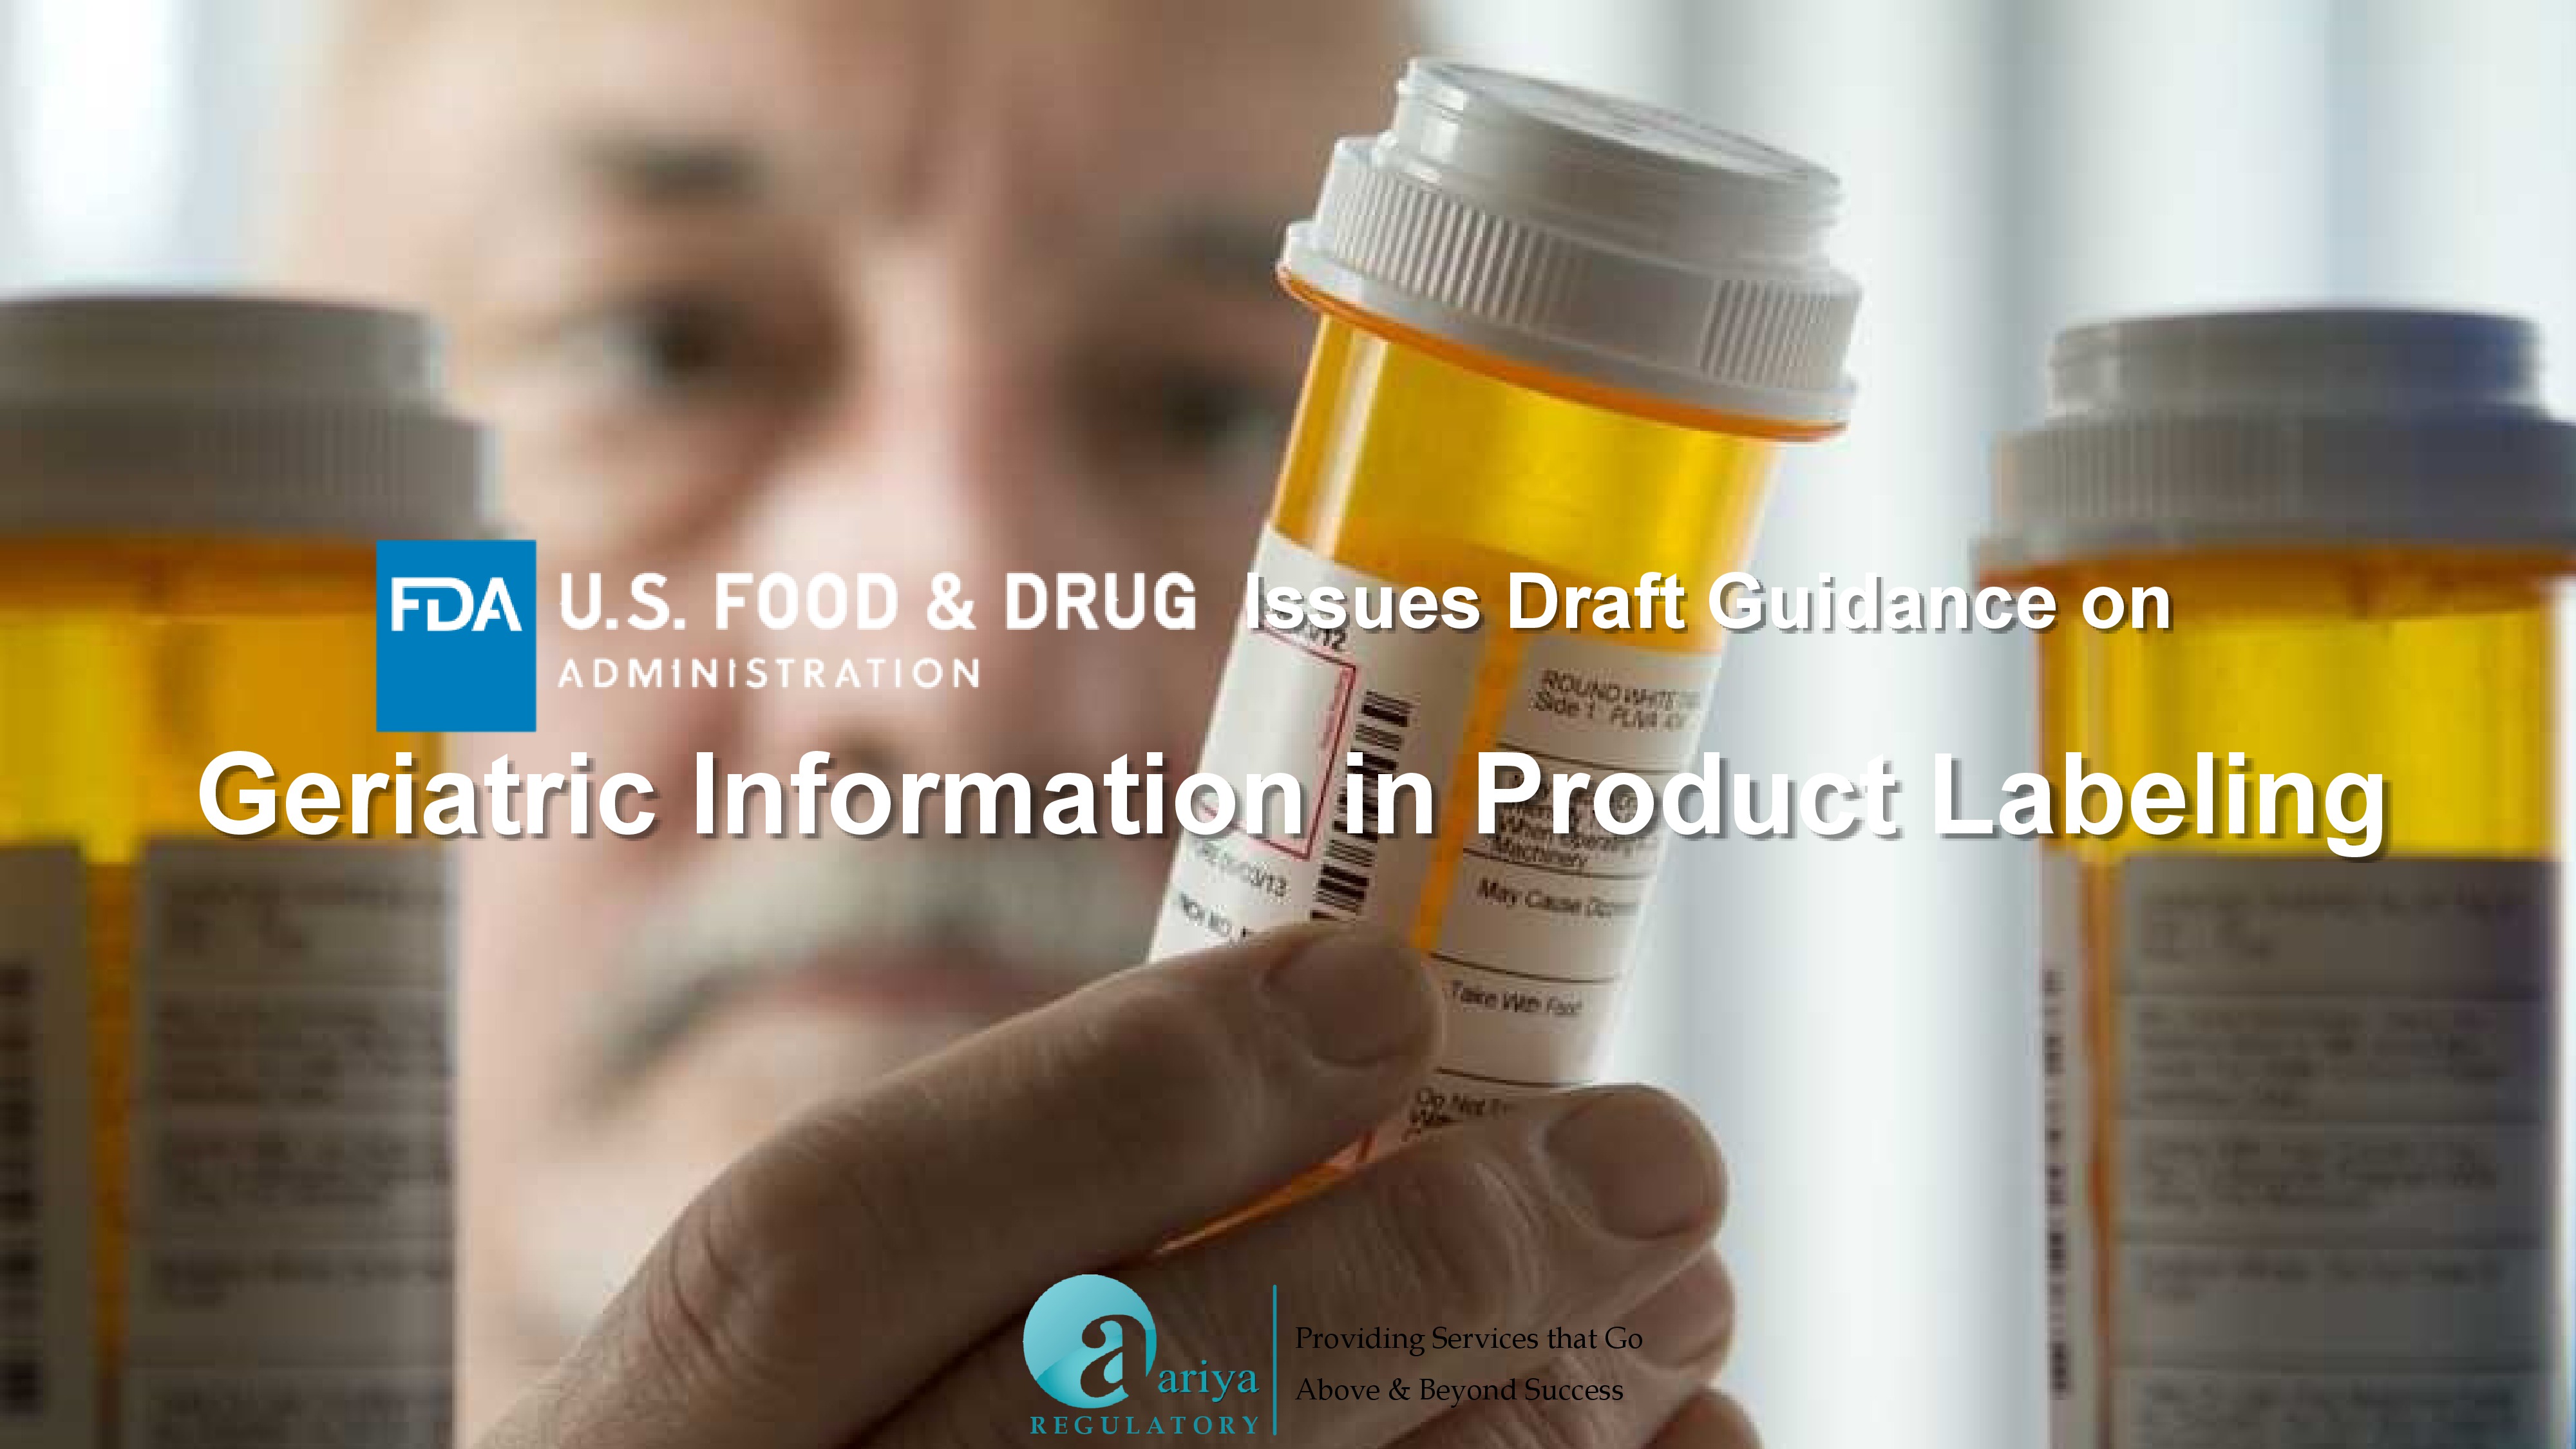 USFDA Issues Draft Guidance on Geriatric Information in Product Labeling